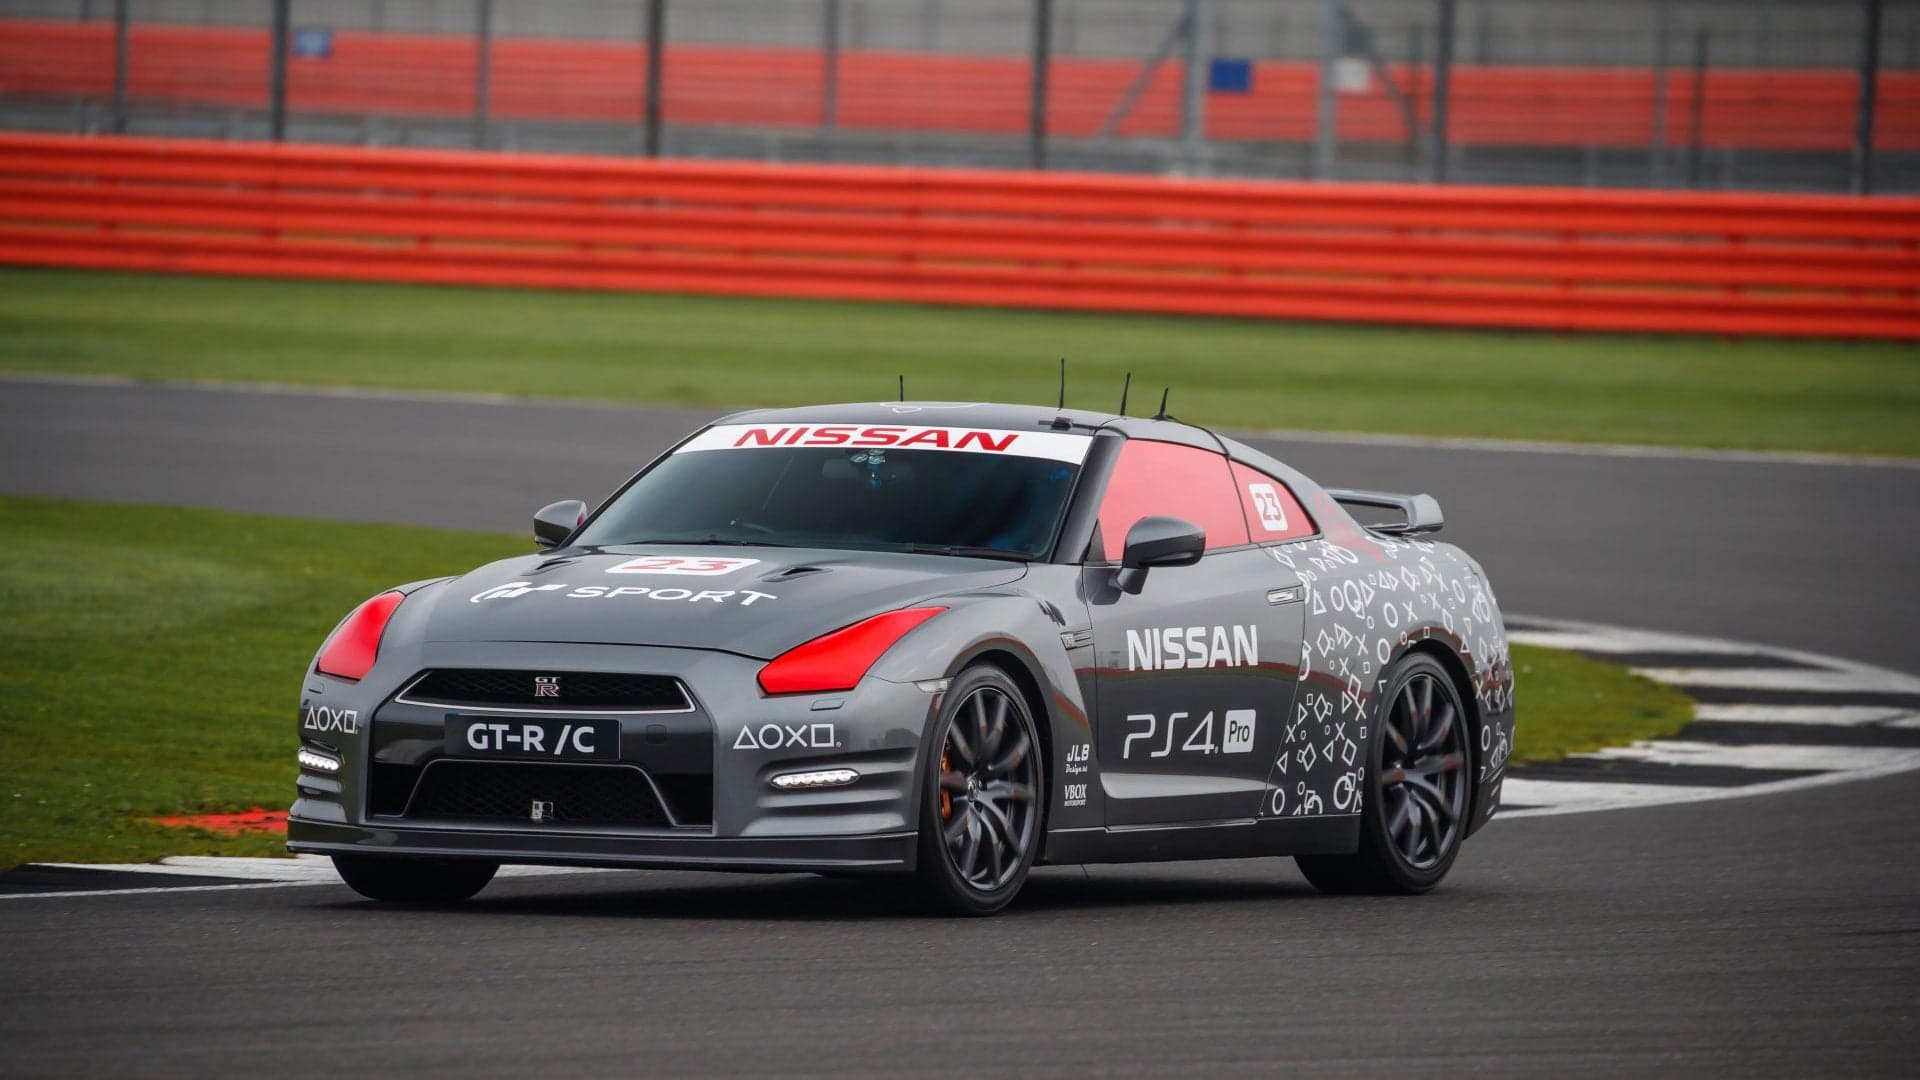 Watch a Life-Sized Remote Control Nissan GT-R Lap Silverstone